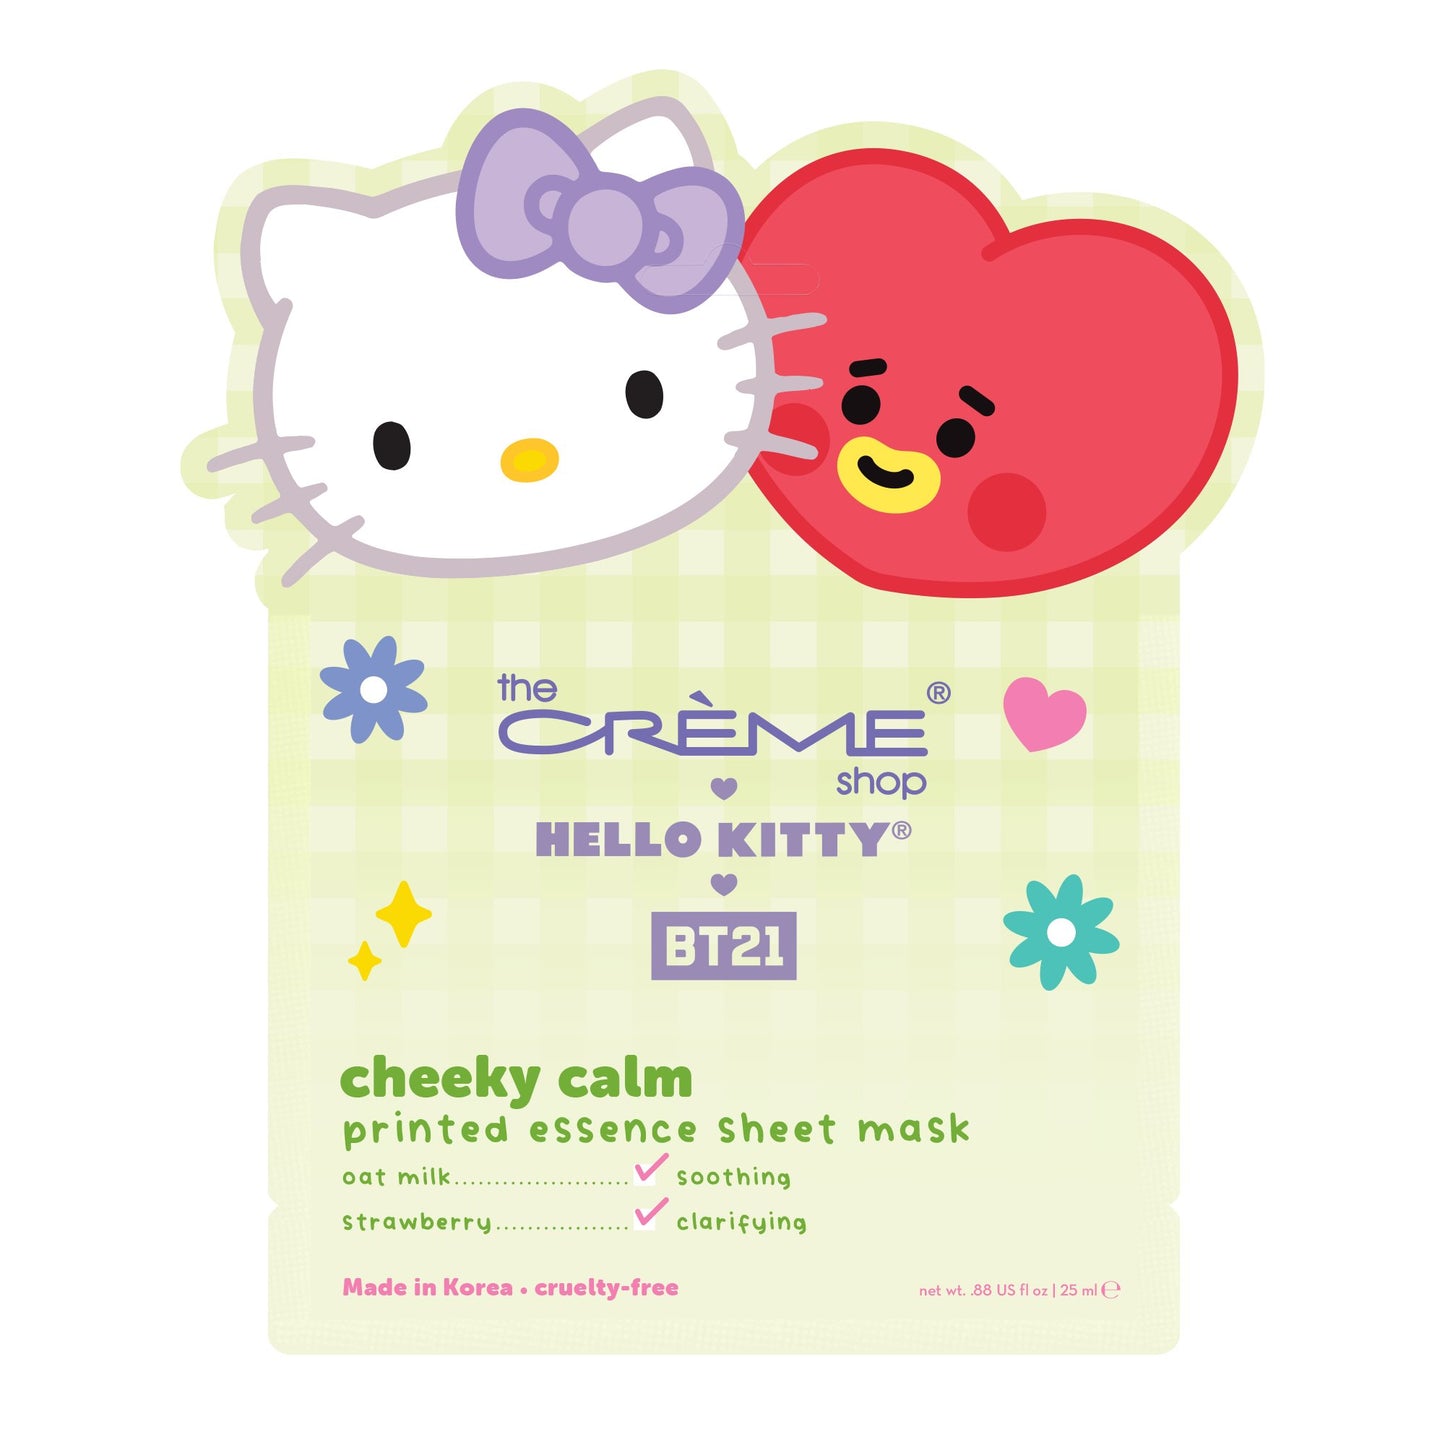 Soothing and Clarifying Hello Kitty & BT21 Cheeky Calm Printed Essence Sheet Mask Animated Sheet Mask, $4